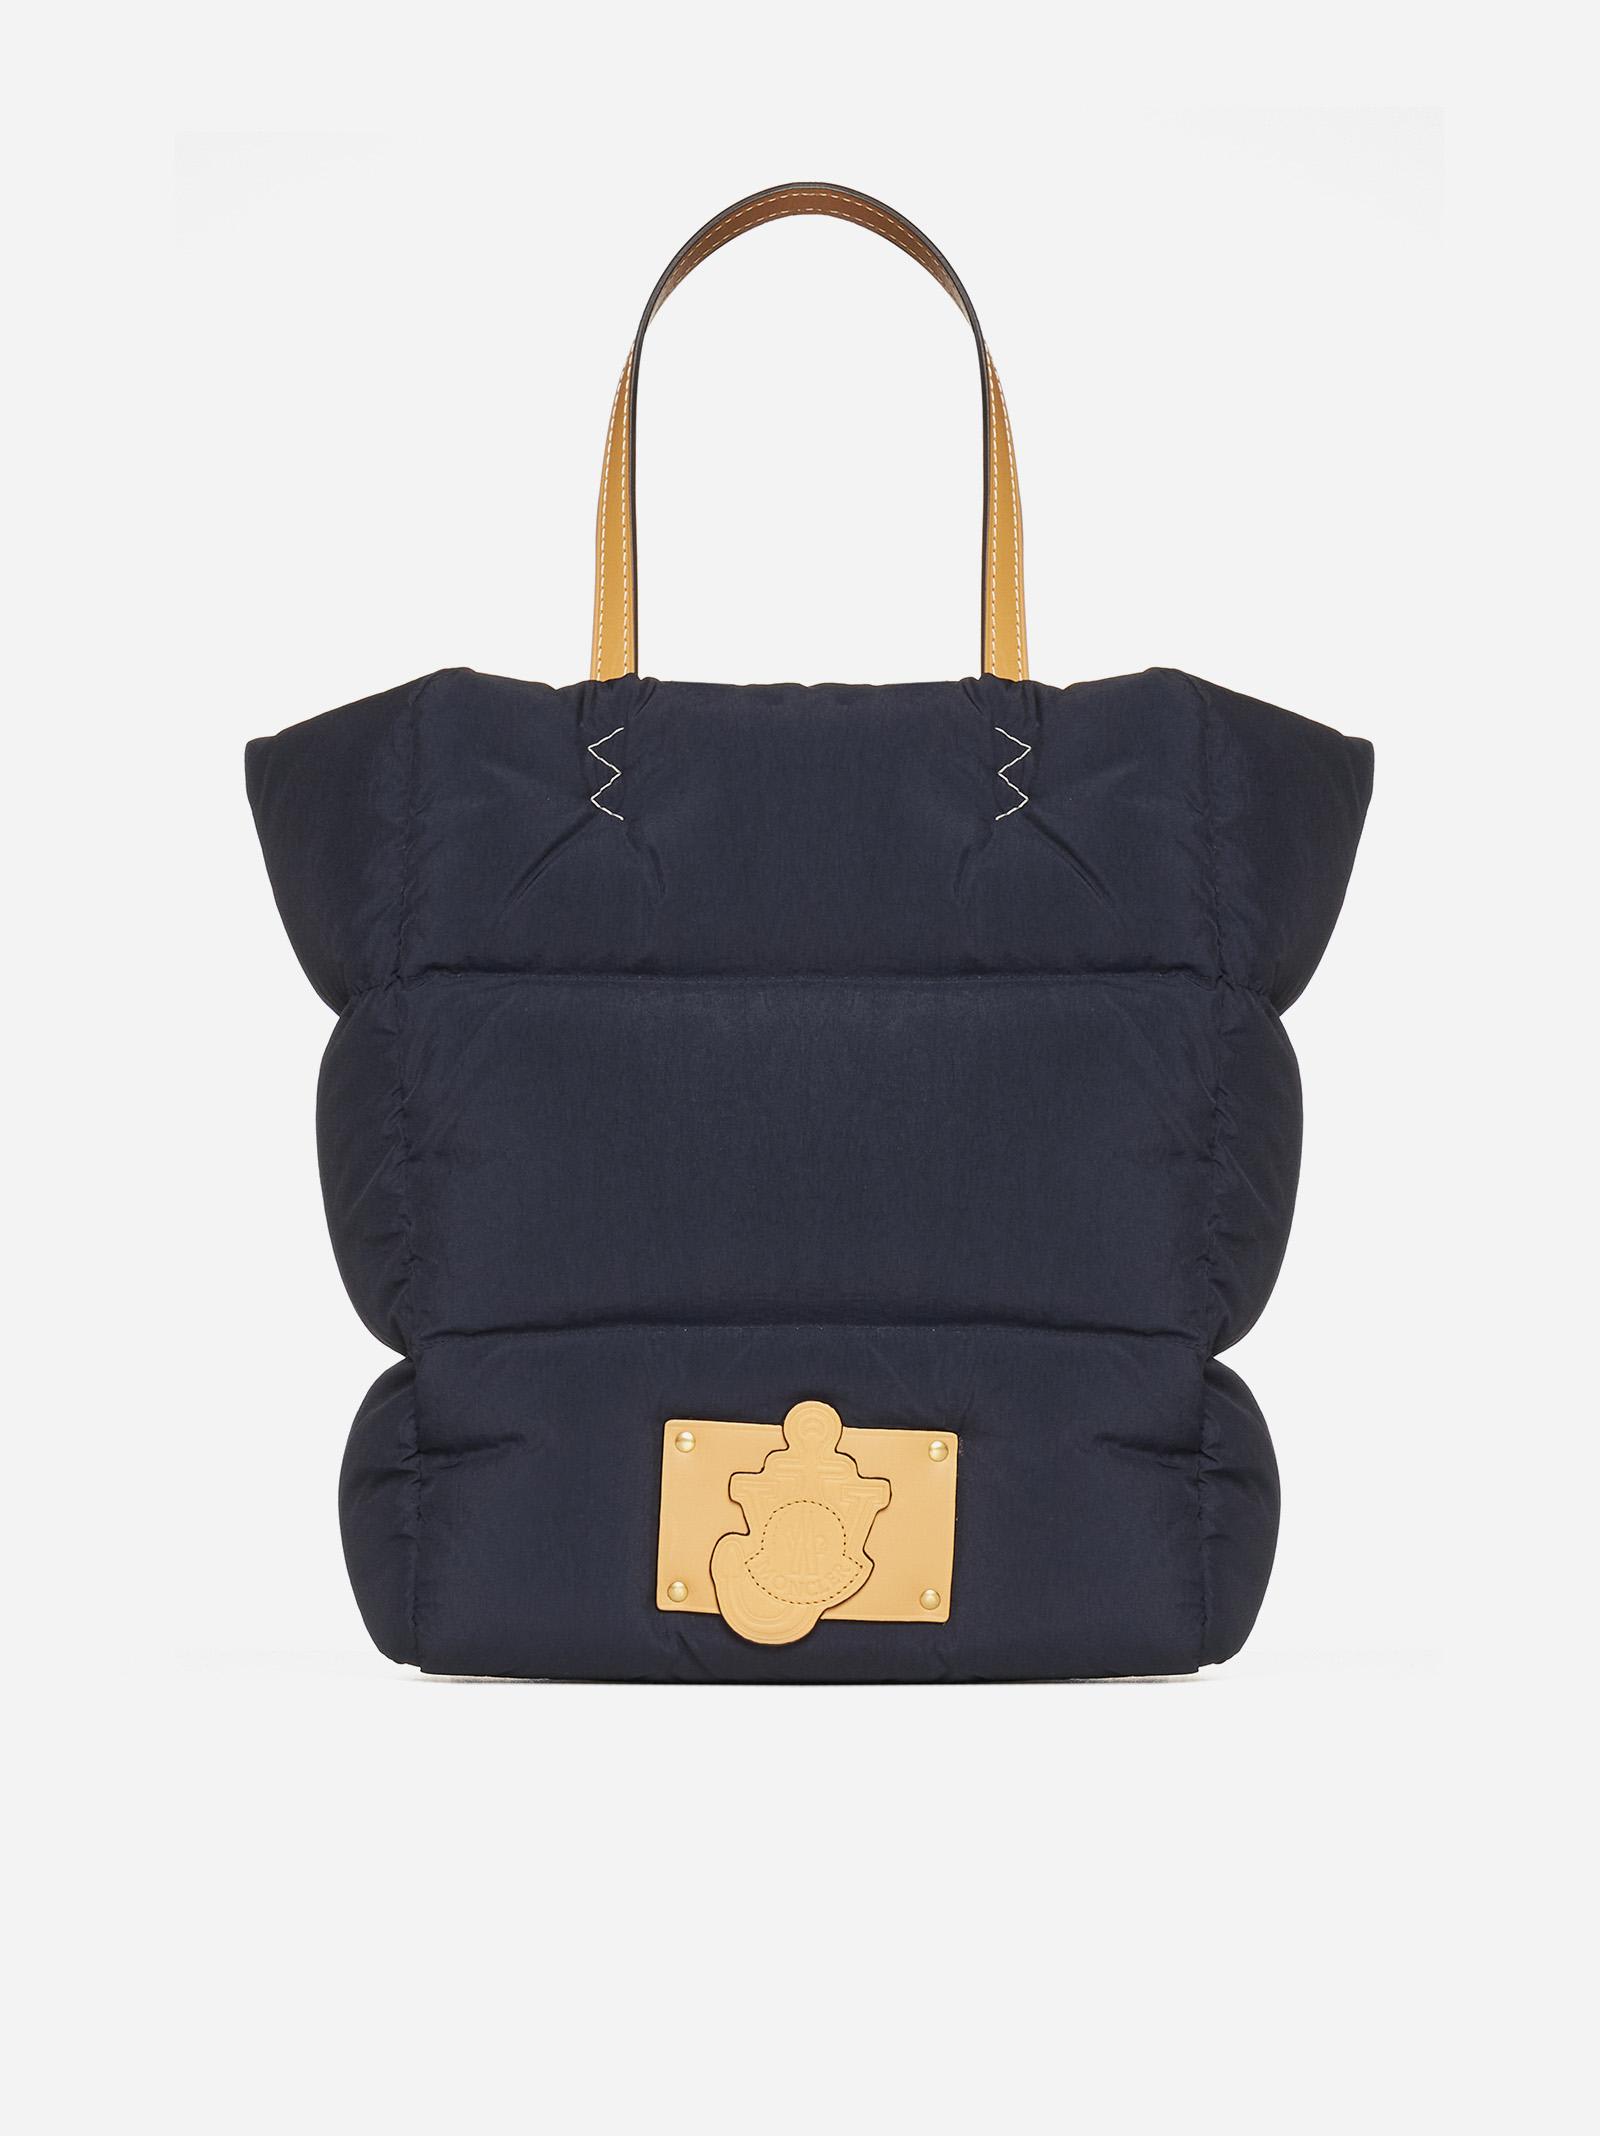 Moncler Genius Nylon And Leather Tote Bag In Blue